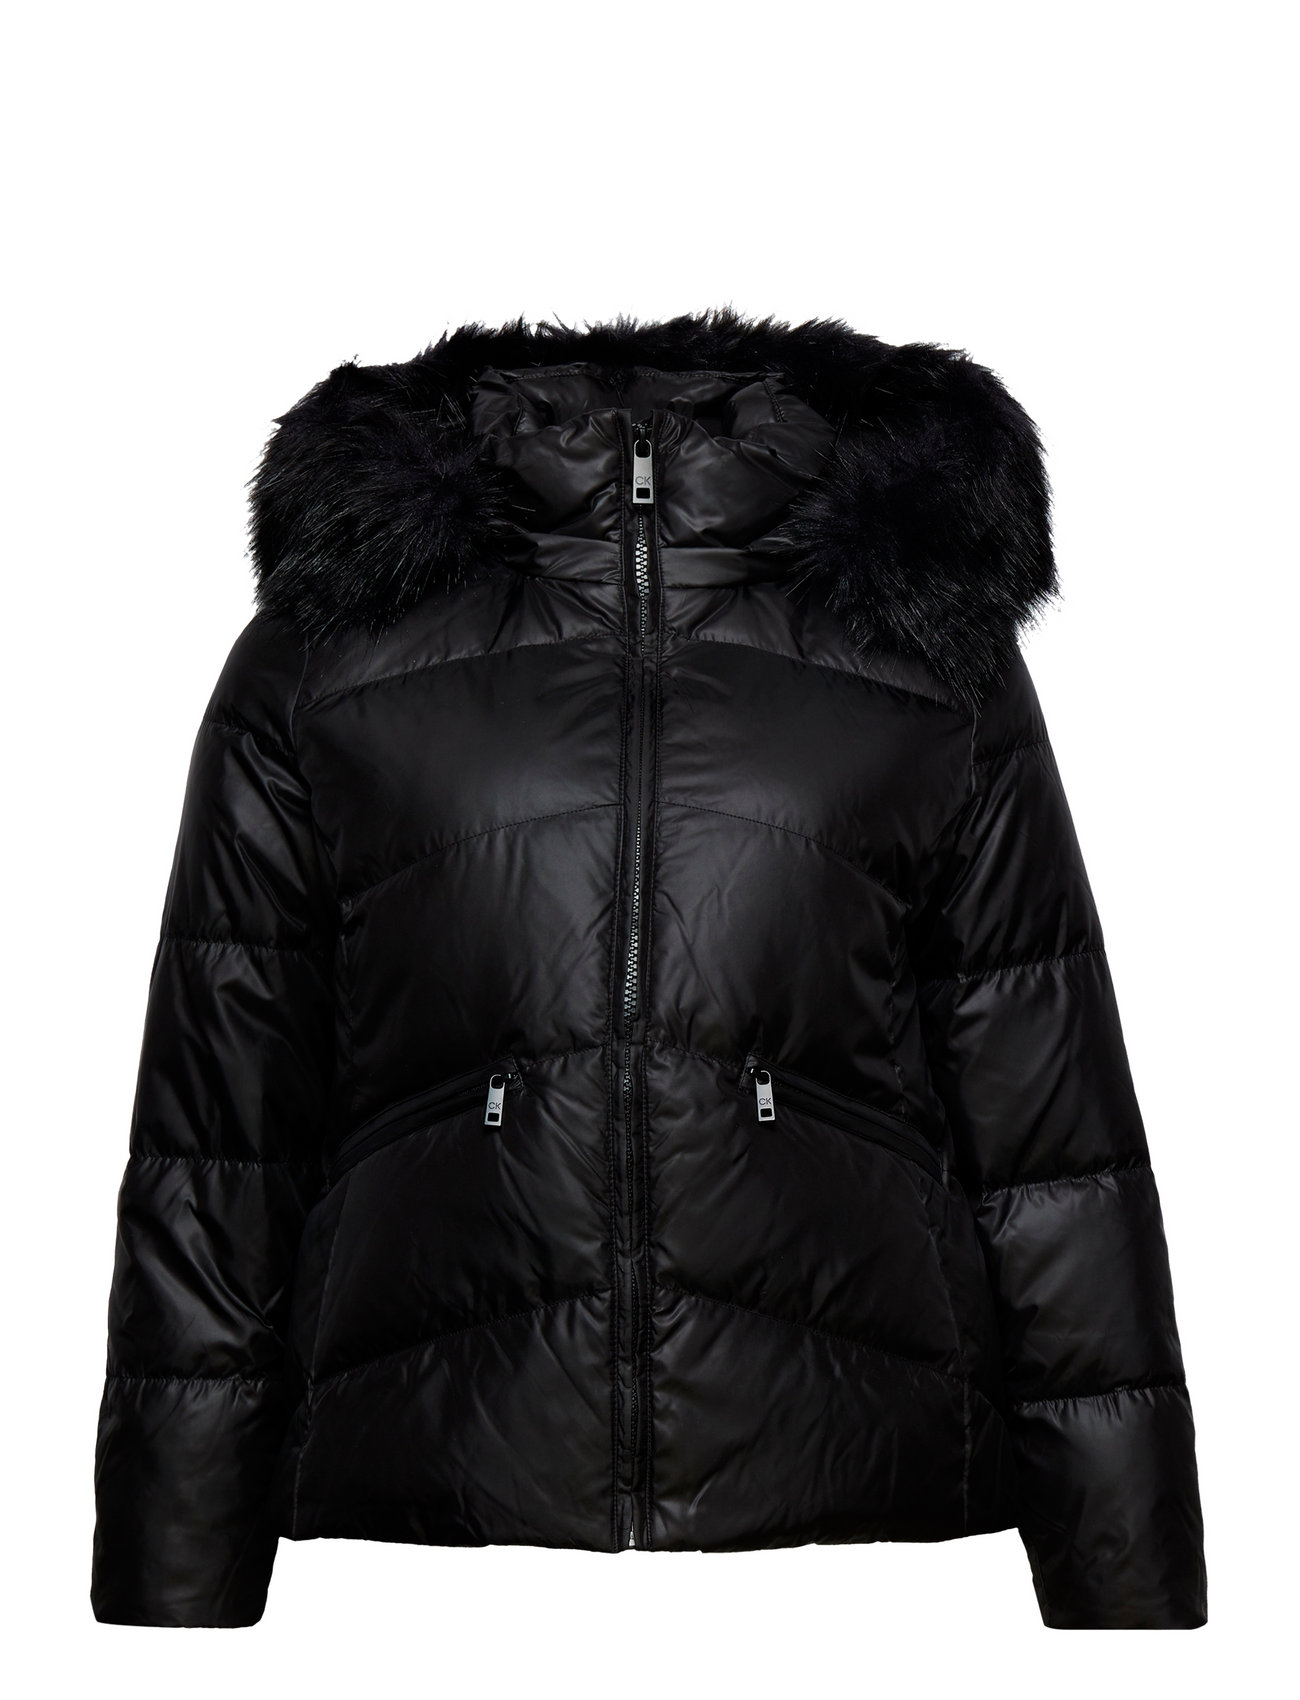 Calvin Klein Essential Real Down Jacket Inclv - 104.97 €. Buy Down- &  padded jackets from Calvin Klein online at Boozt.com. Fast delivery and  easy returns